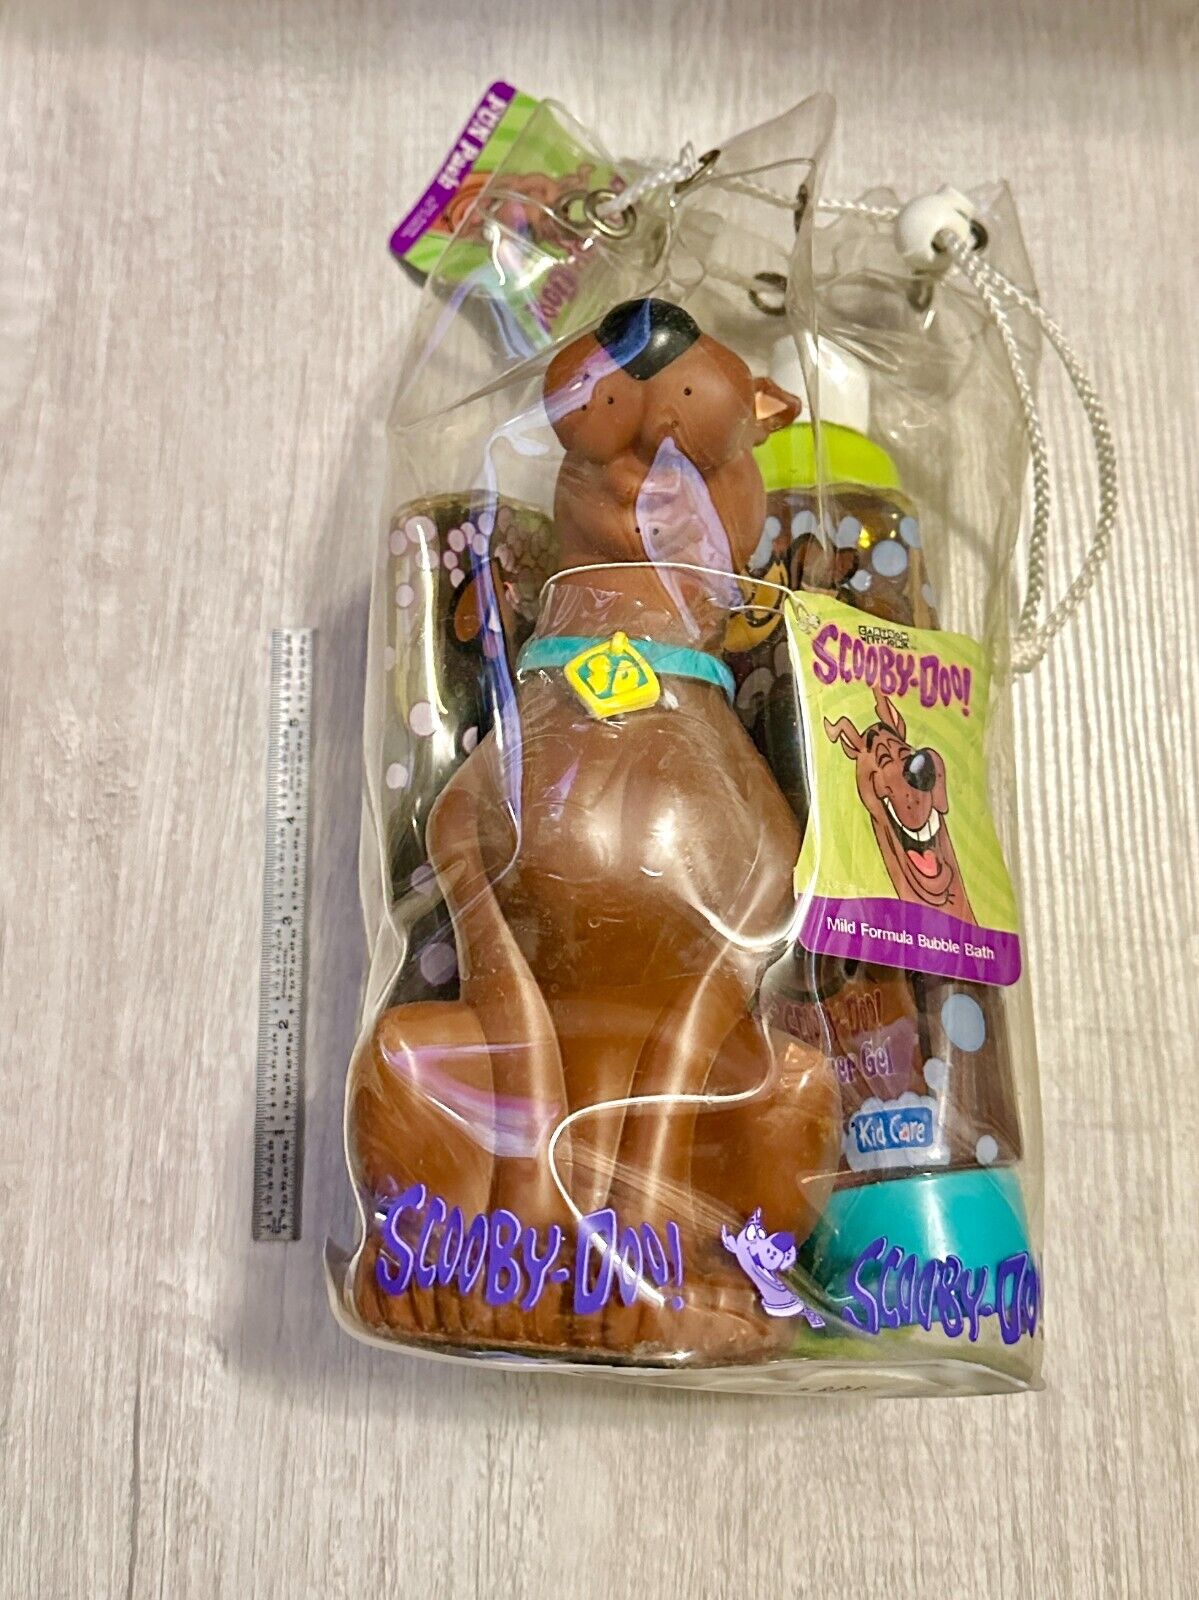 Scooby Doo Vintage 2000's Bubble Bath FULL SET Figure Bottle New Sealed With Tag